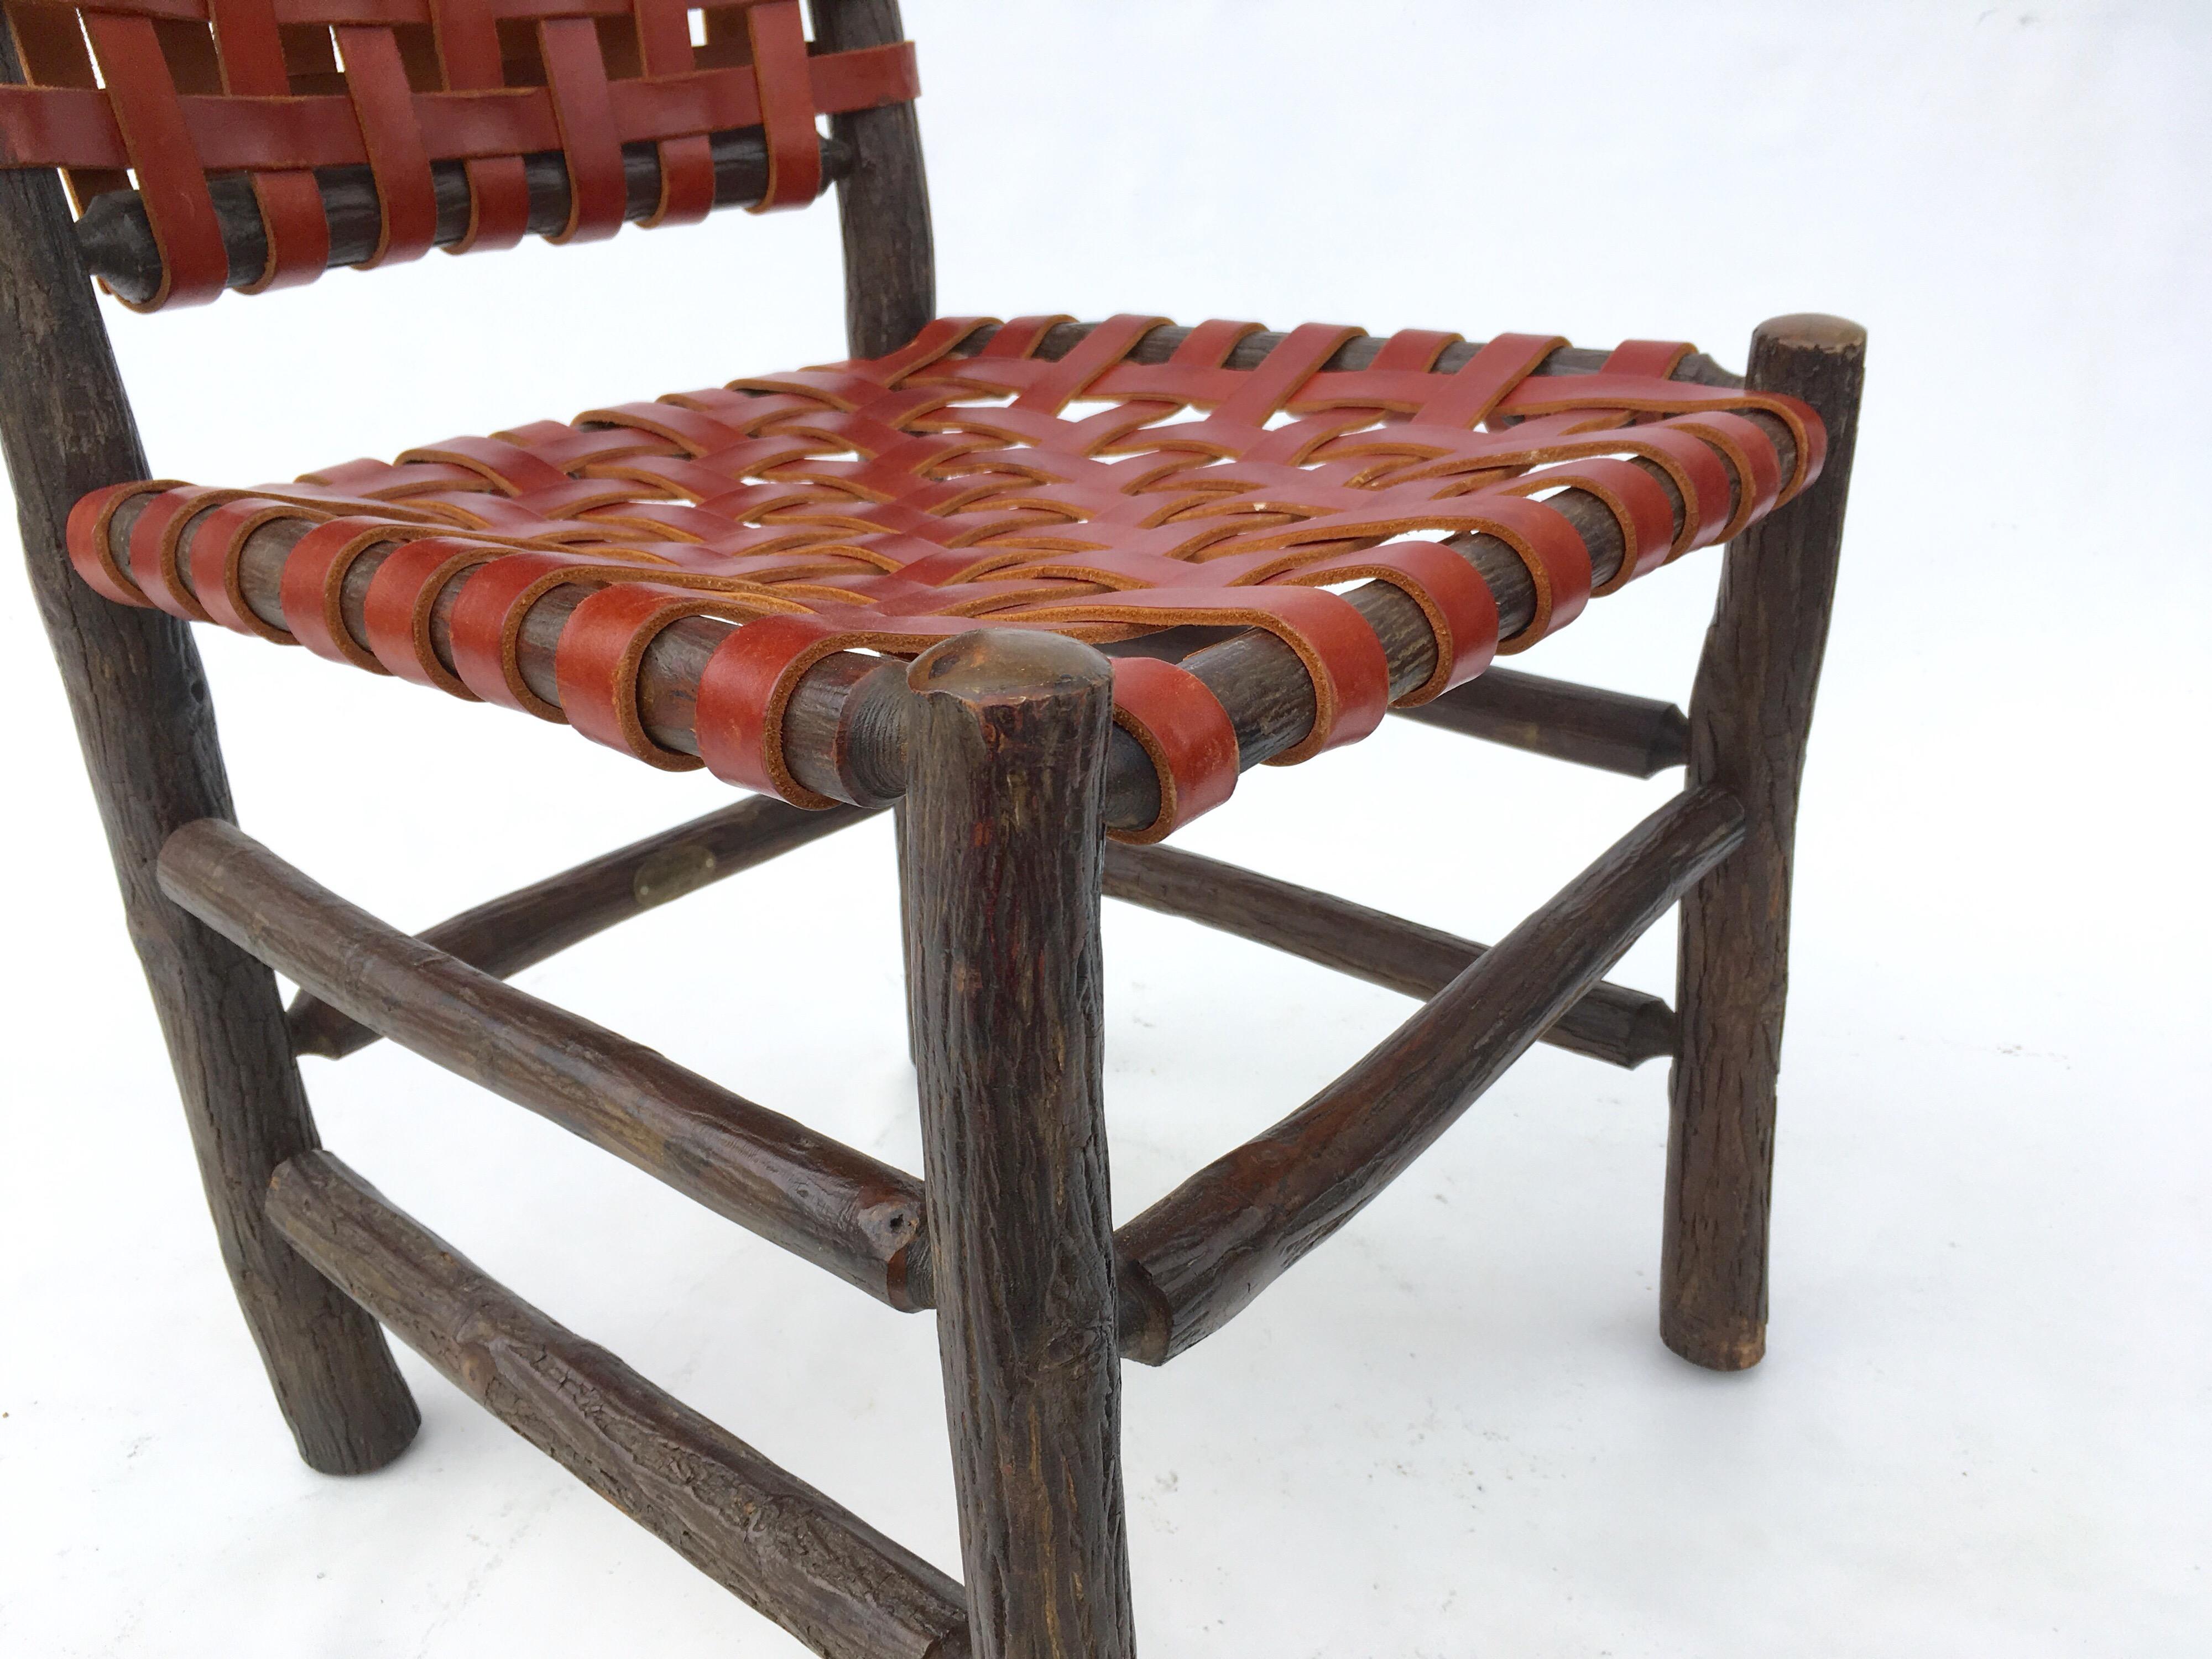 Signed Old Hickory chairs with woven saddle leather seats and backs.